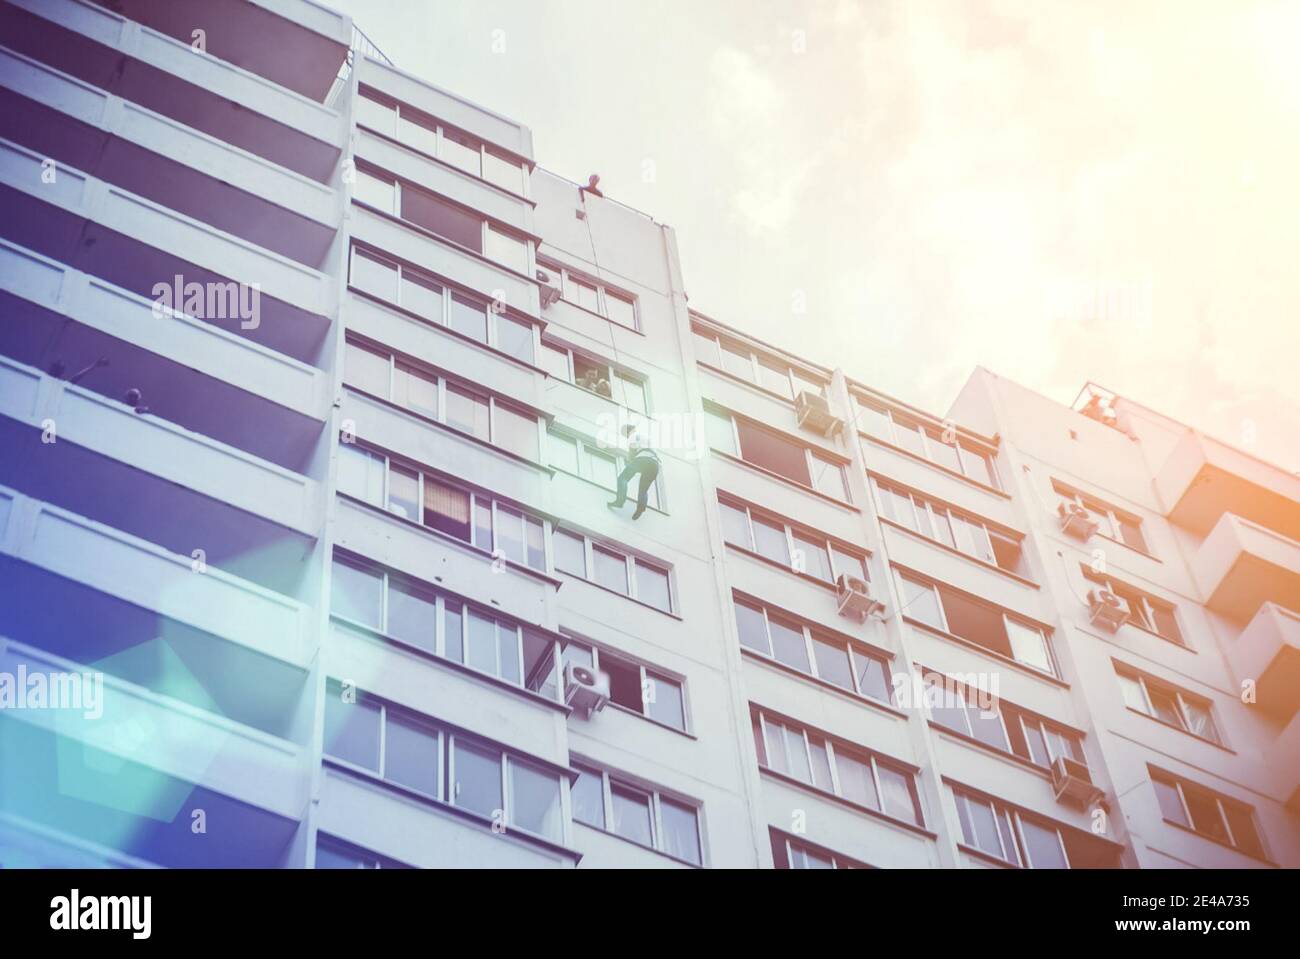 A man on a rope descends from the roof of a building on a rope through a window. Stock Photo